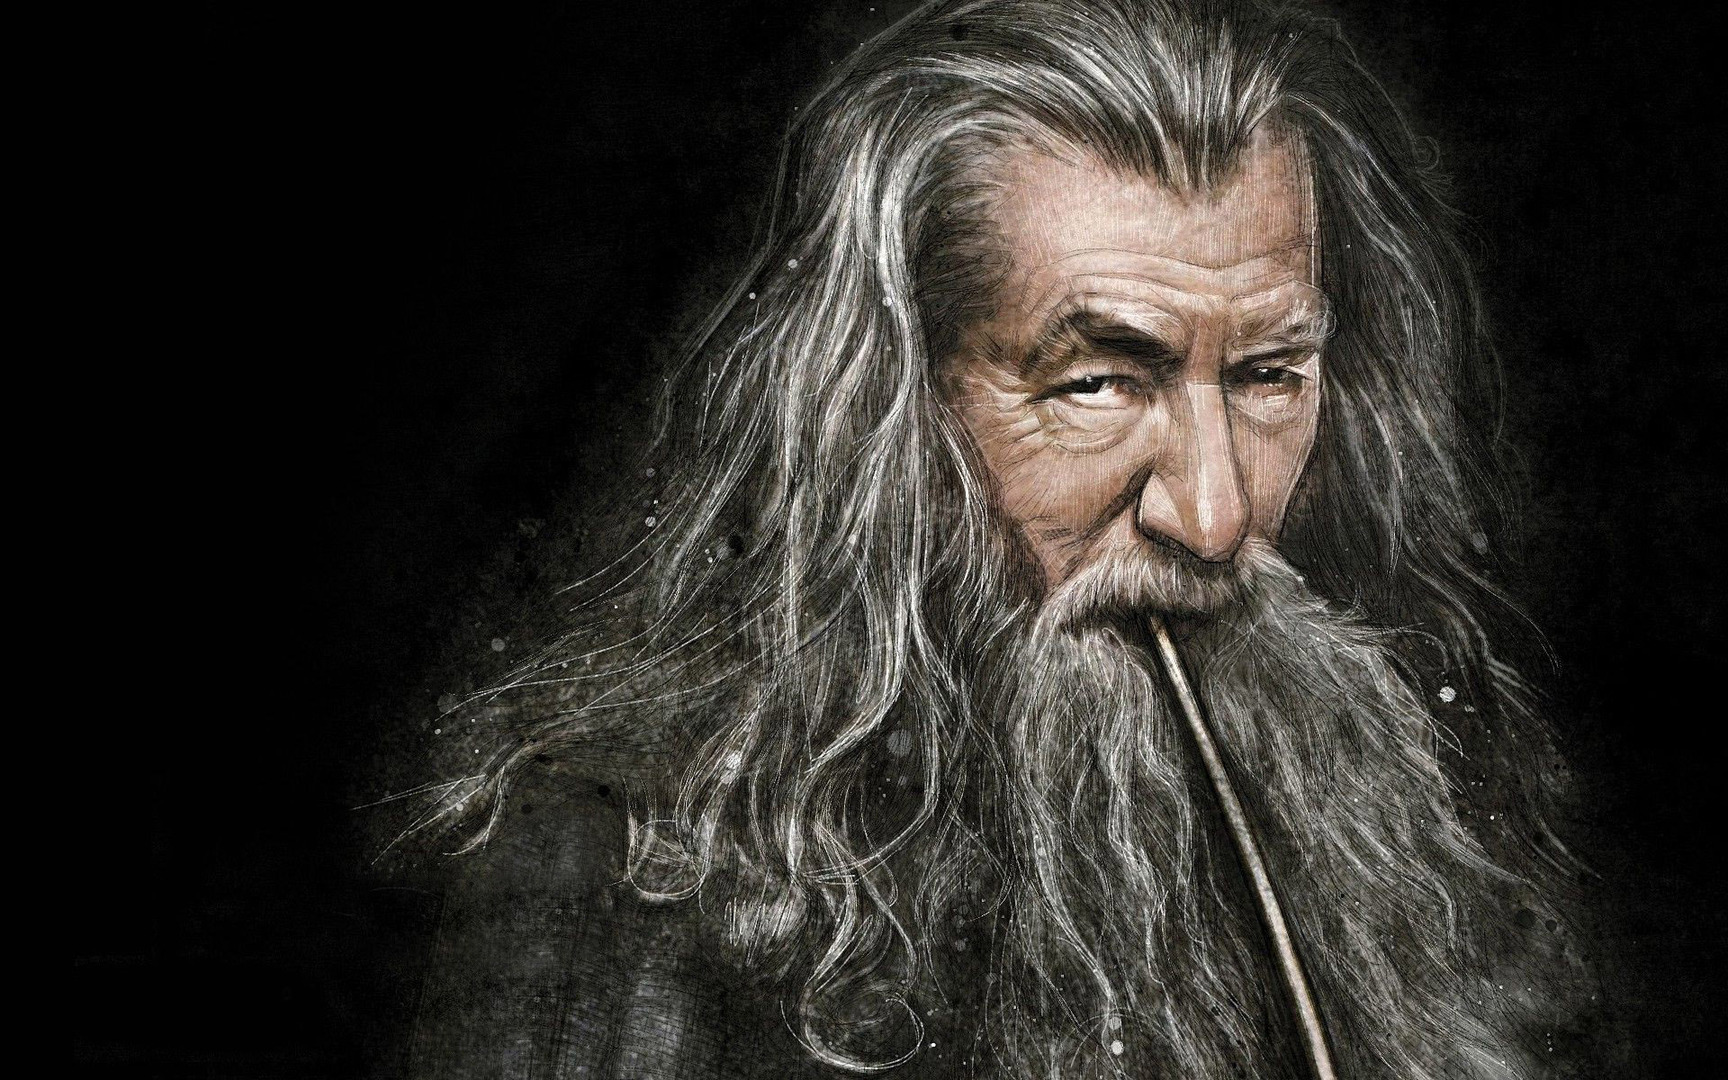 Download Gandalf   The Lord of the Rings wallpaper